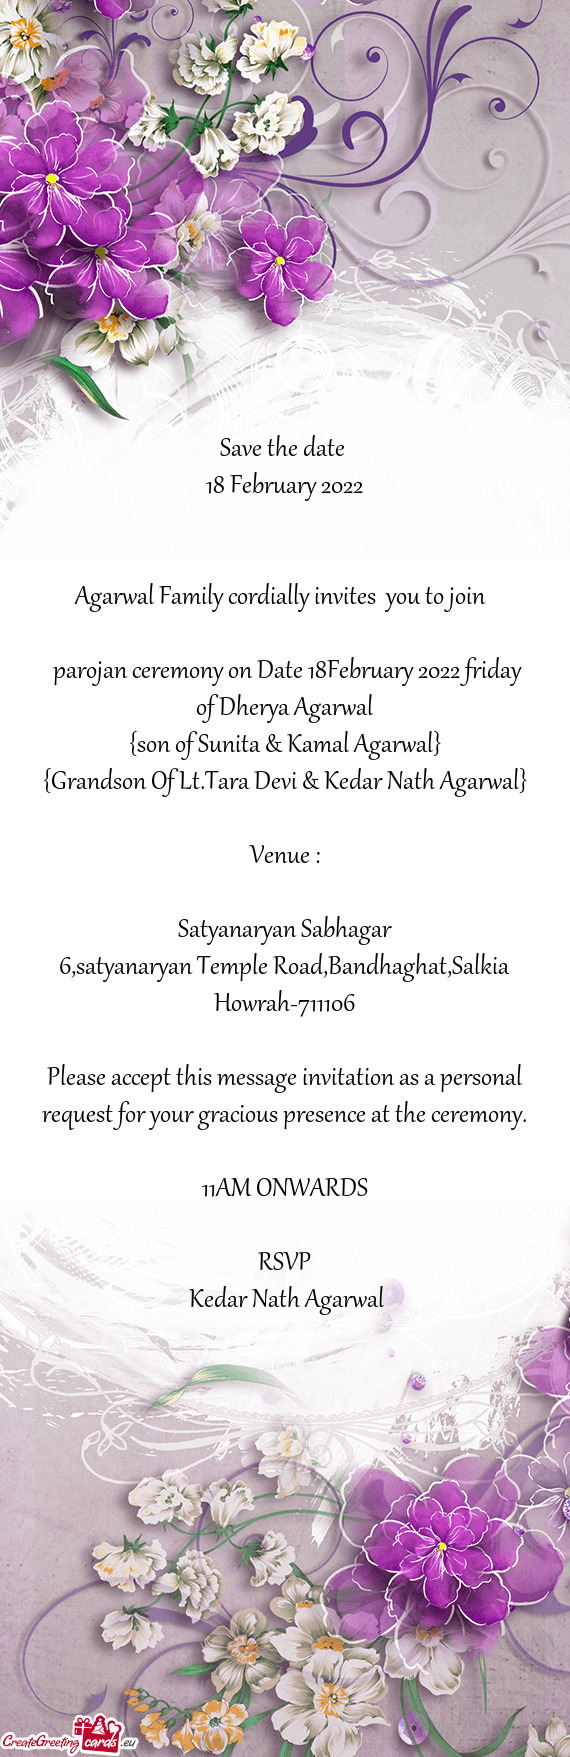 Agarwal Family cordially invites you to join